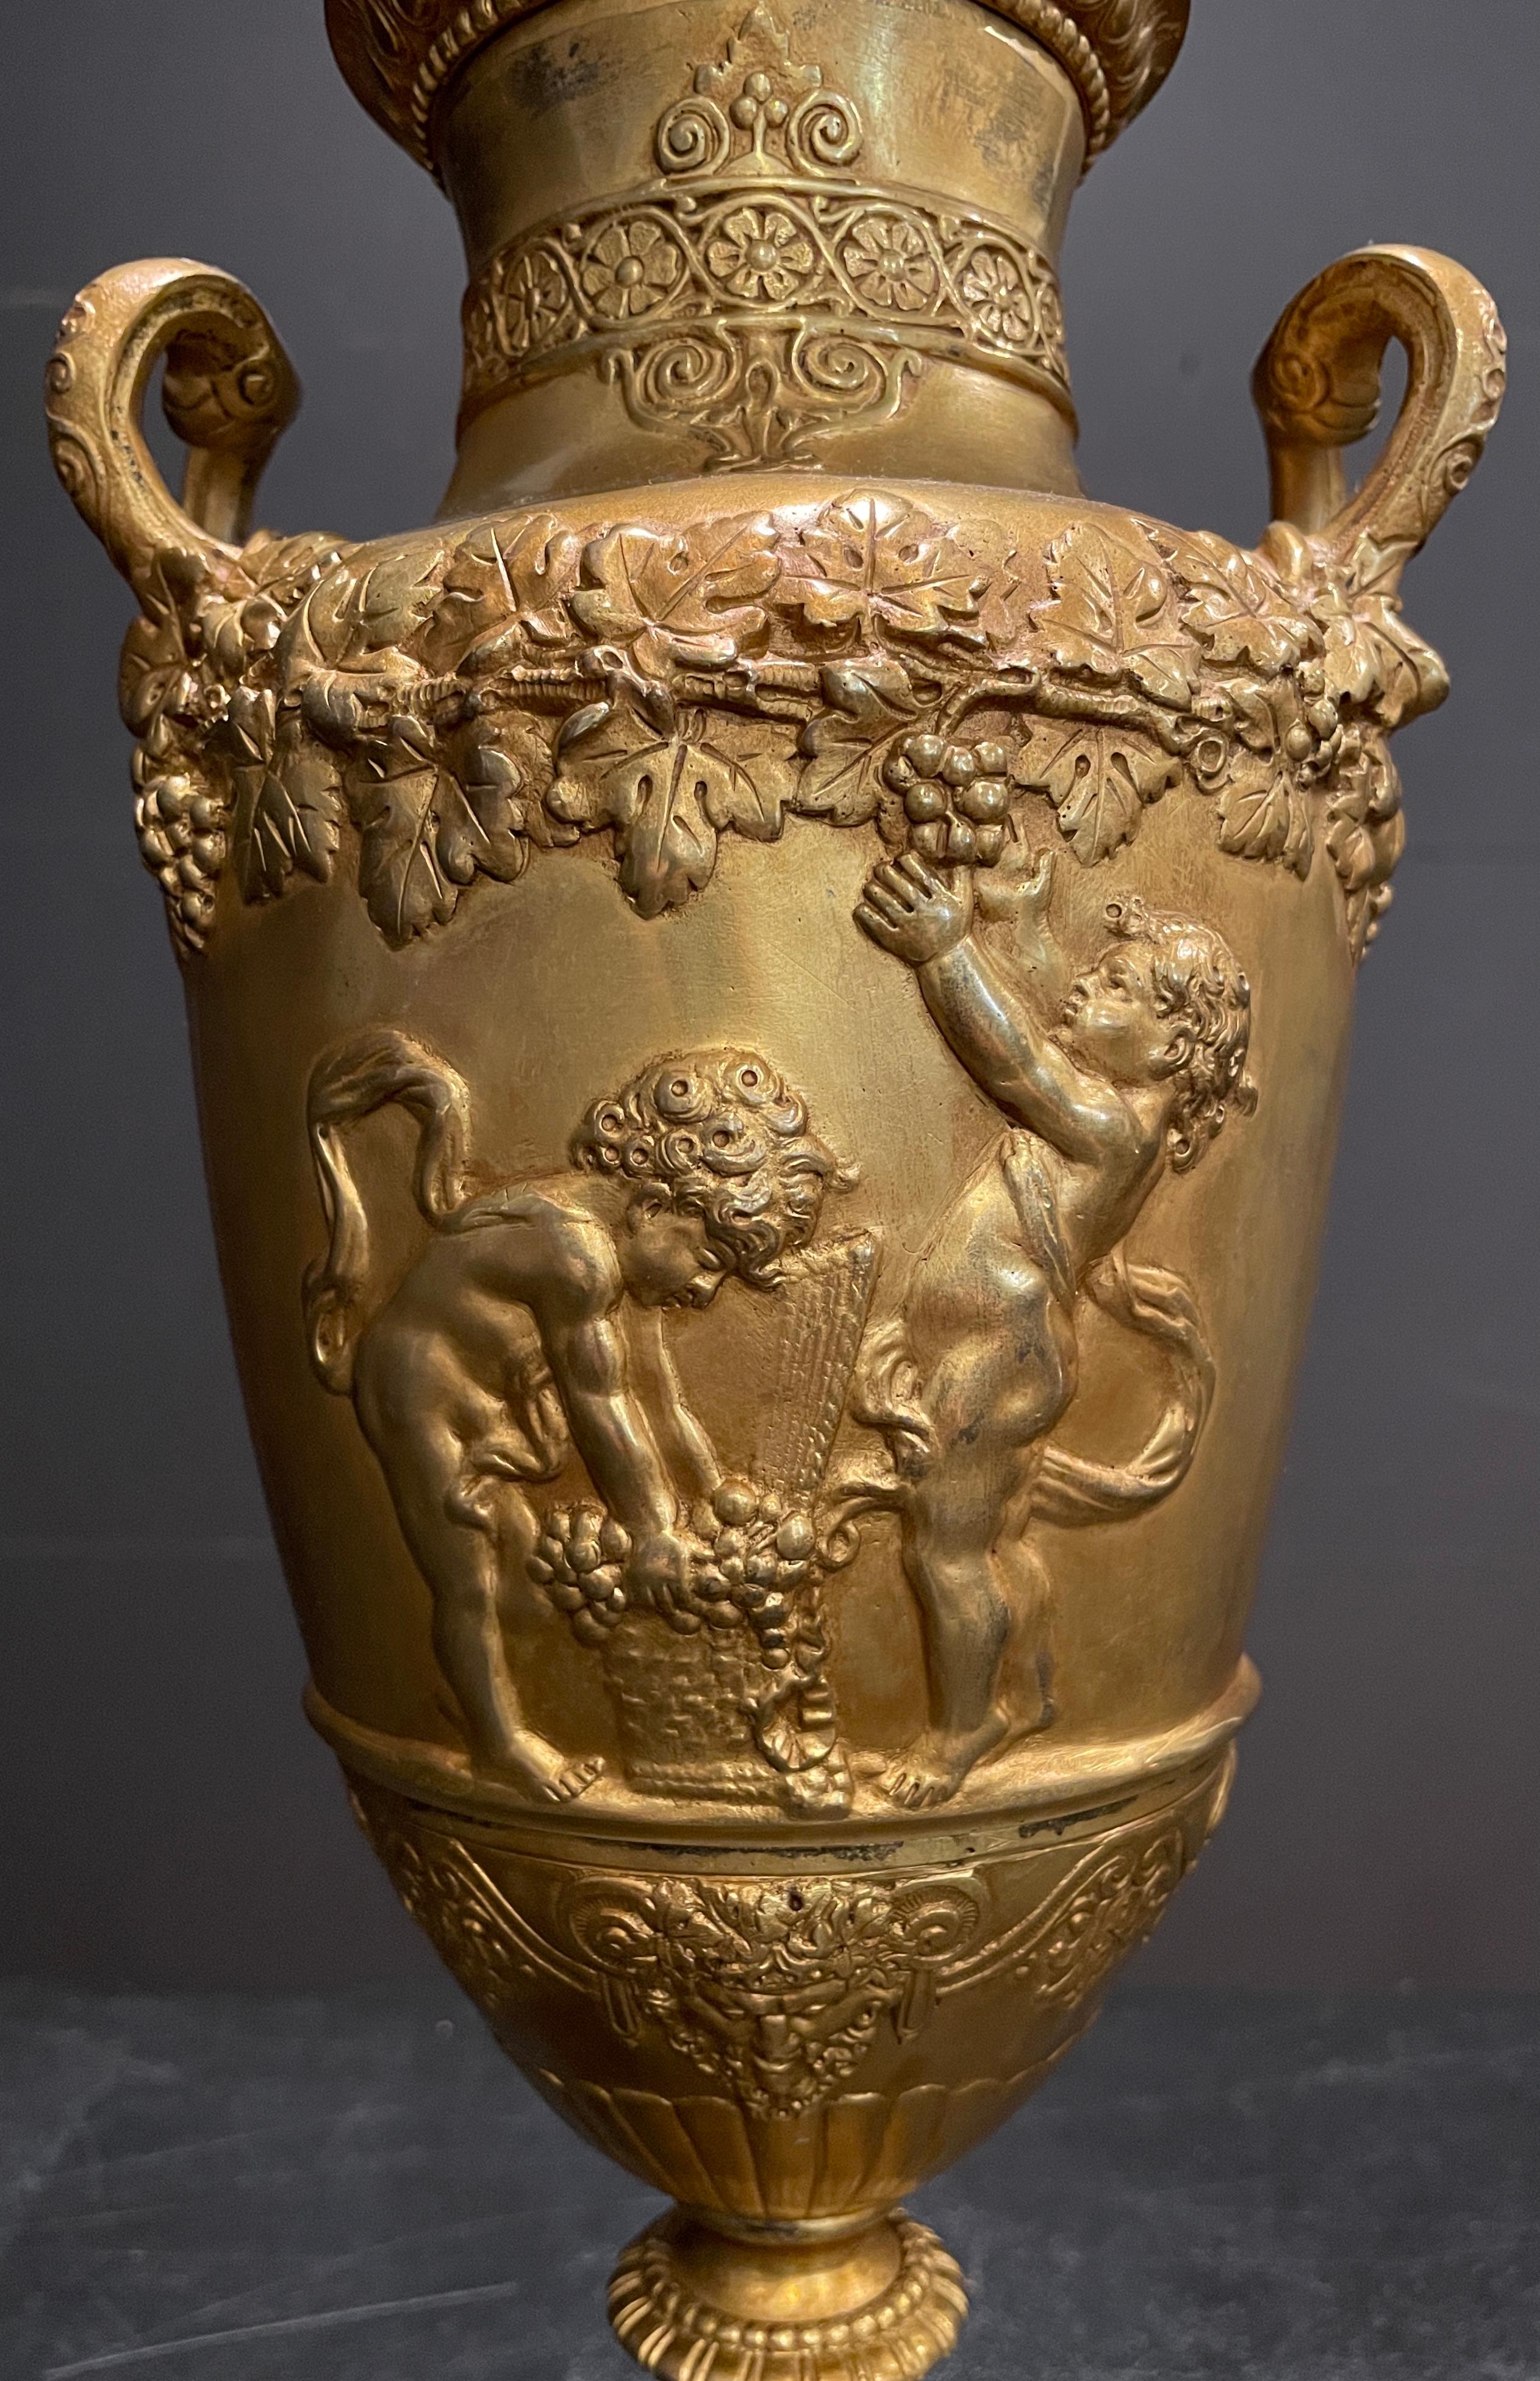 Neoclassical Pair of Gilt Urns as Lamps